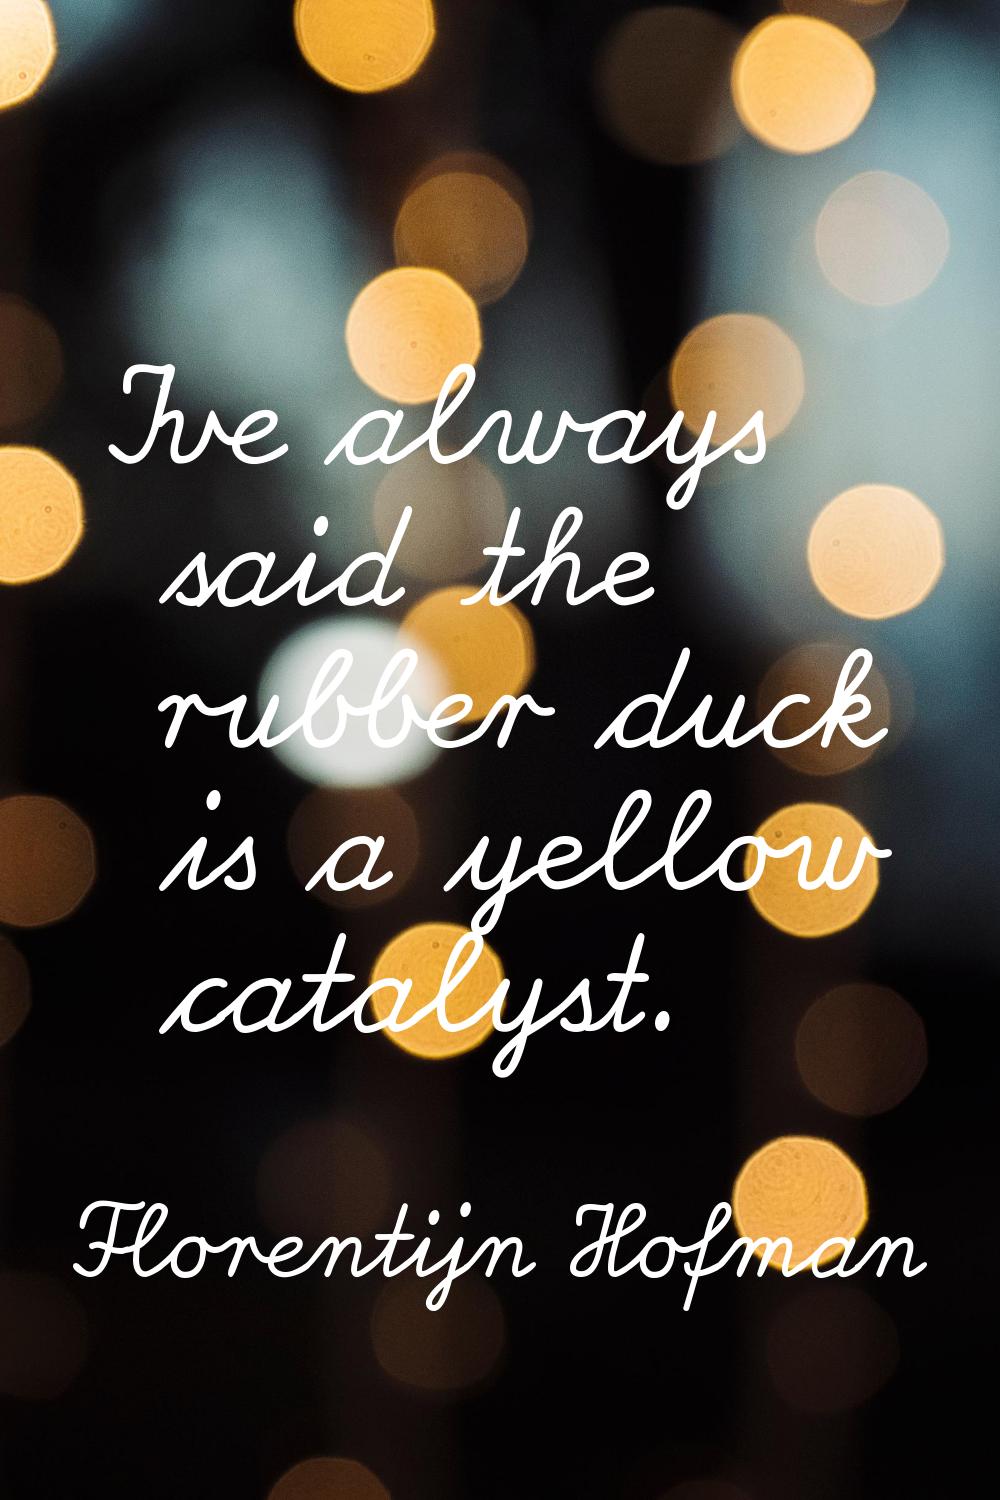 I've always said the rubber duck is a yellow catalyst.